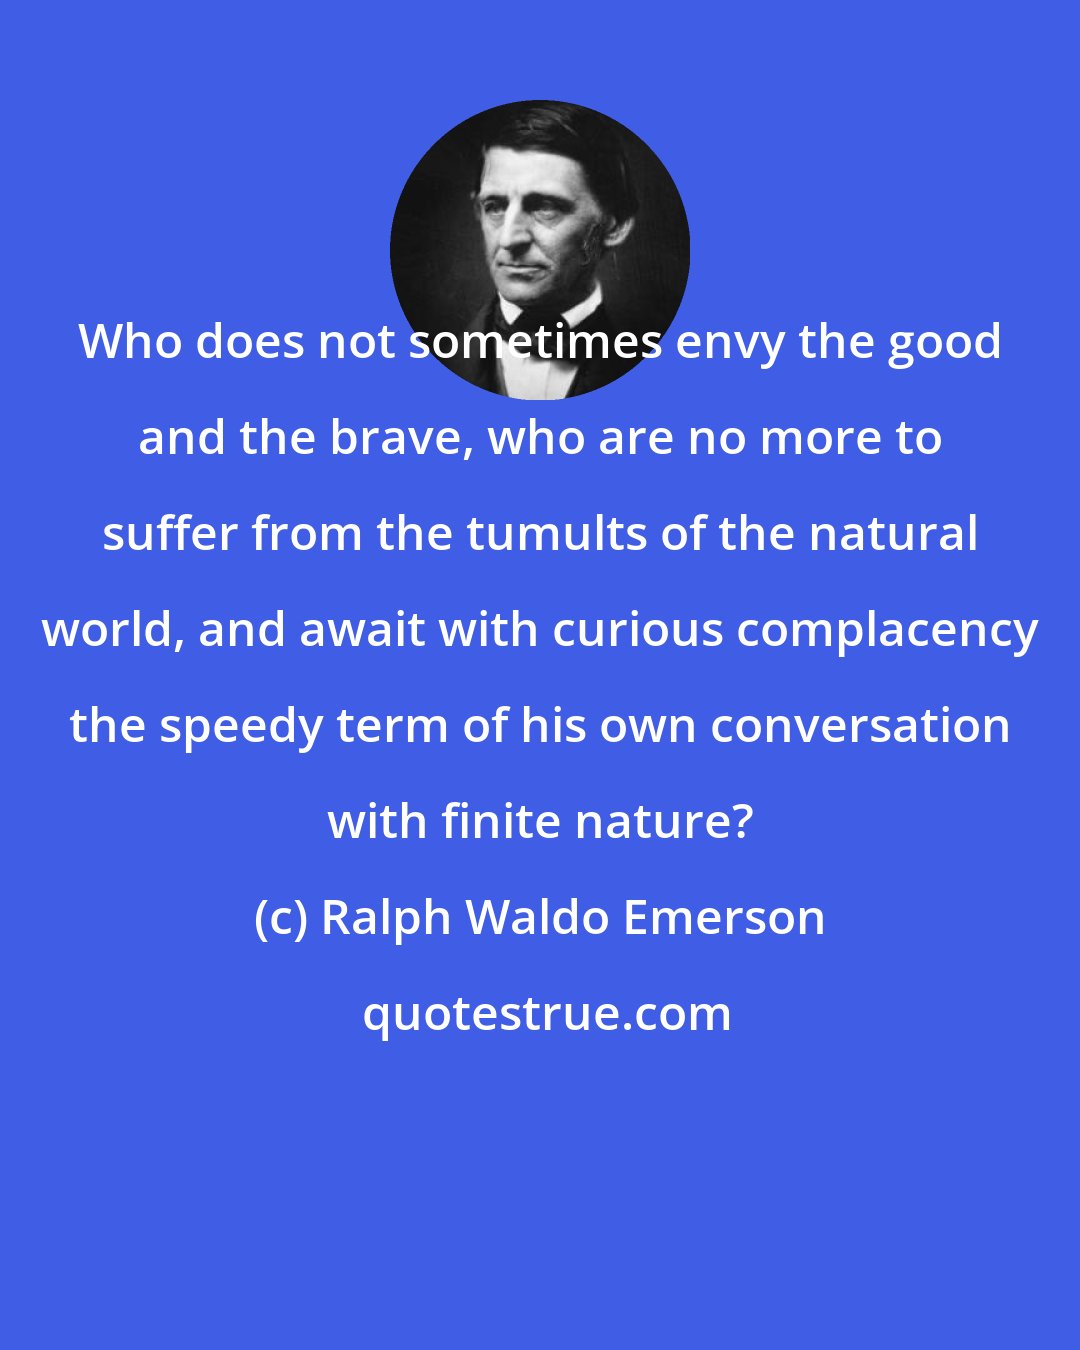 Ralph Waldo Emerson: Who does not sometimes envy the good and the brave, who are no more to suffer from the tumults of the natural world, and await with curious complacency the speedy term of his own conversation with finite nature?